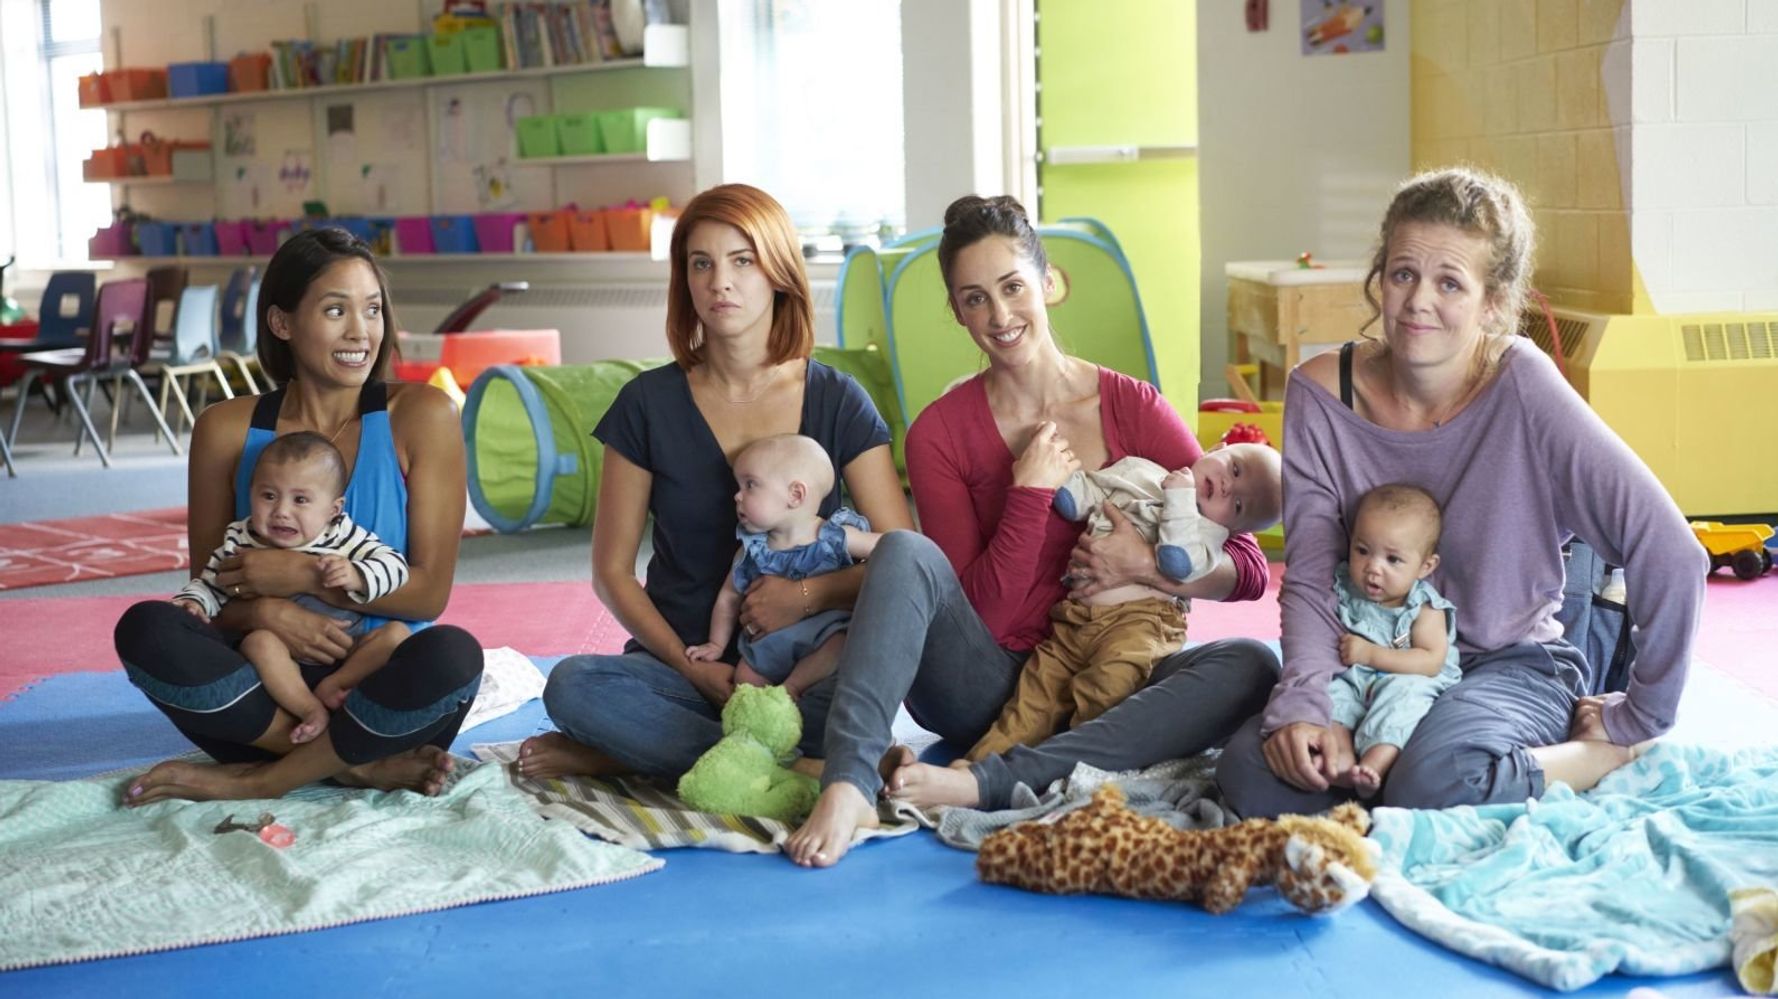 7 Shows Like Workin’ Moms You Must See